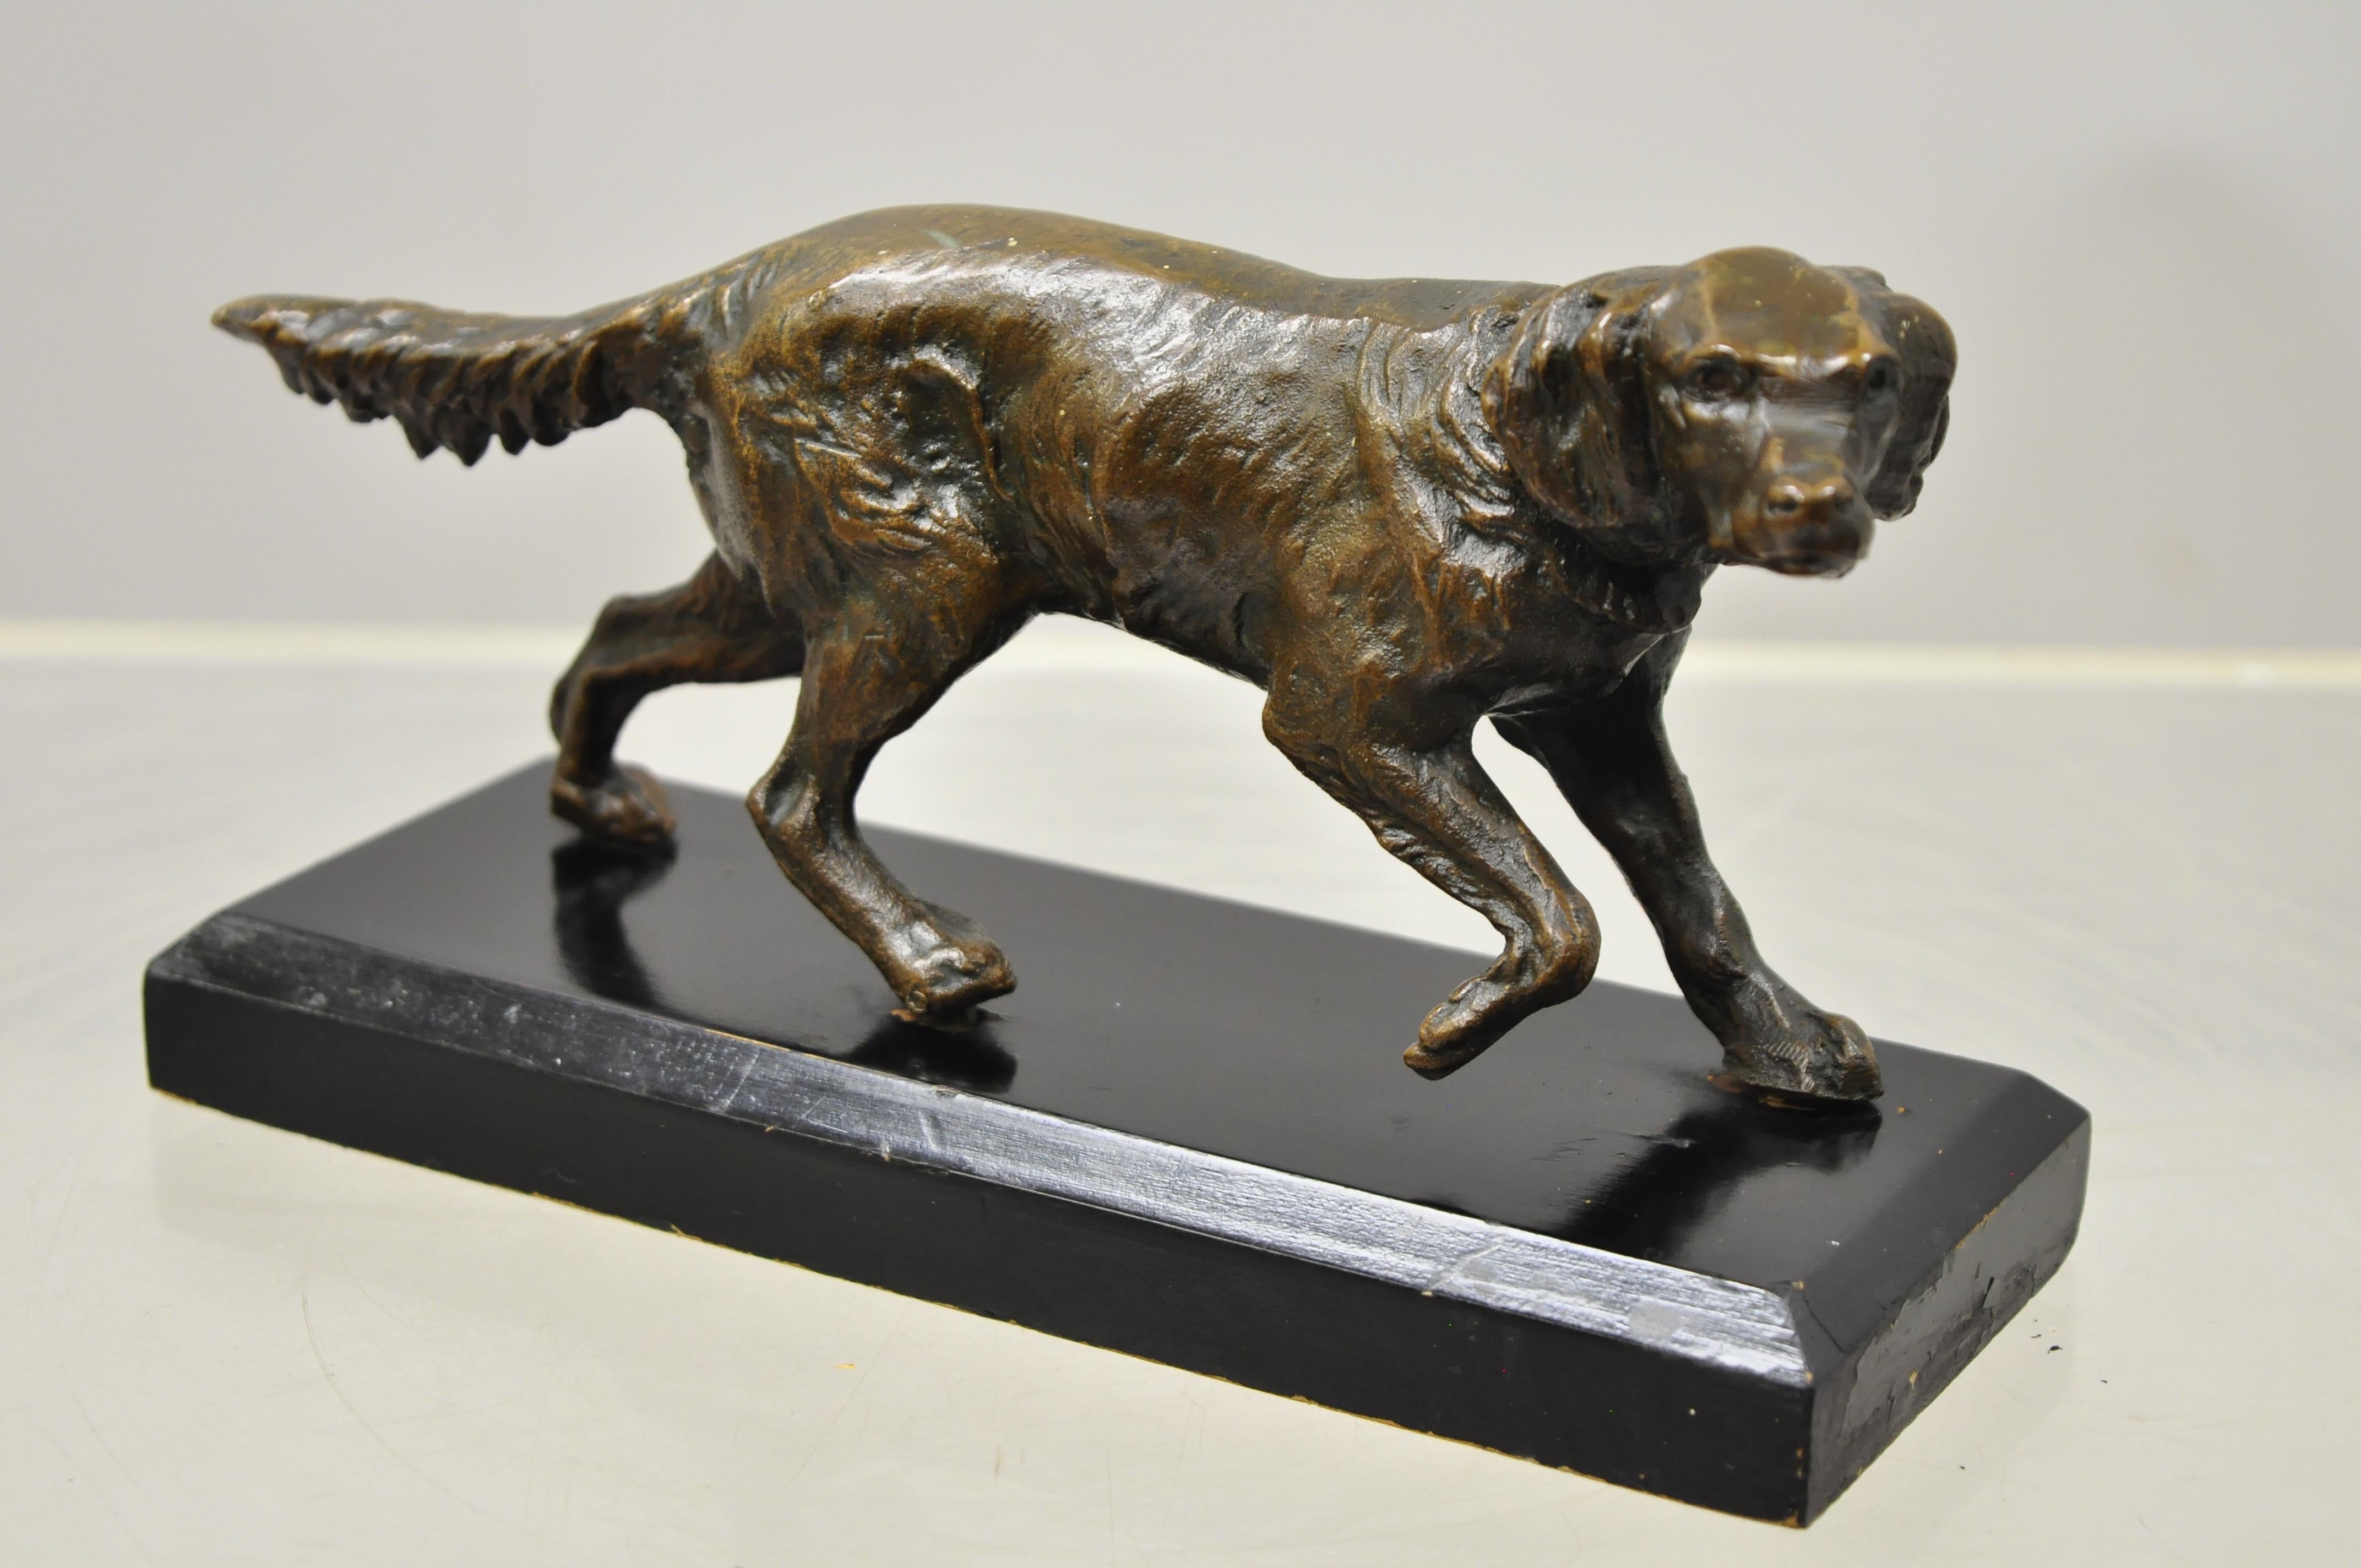 Antique bronze Labrador retriever dog statue figurine paperweight on wooden base. Listing features solid bronze Labrador retriever dog figure, wooden base, very fine casting, very nice antique item, circa early to mid-20th century.
Measurements: